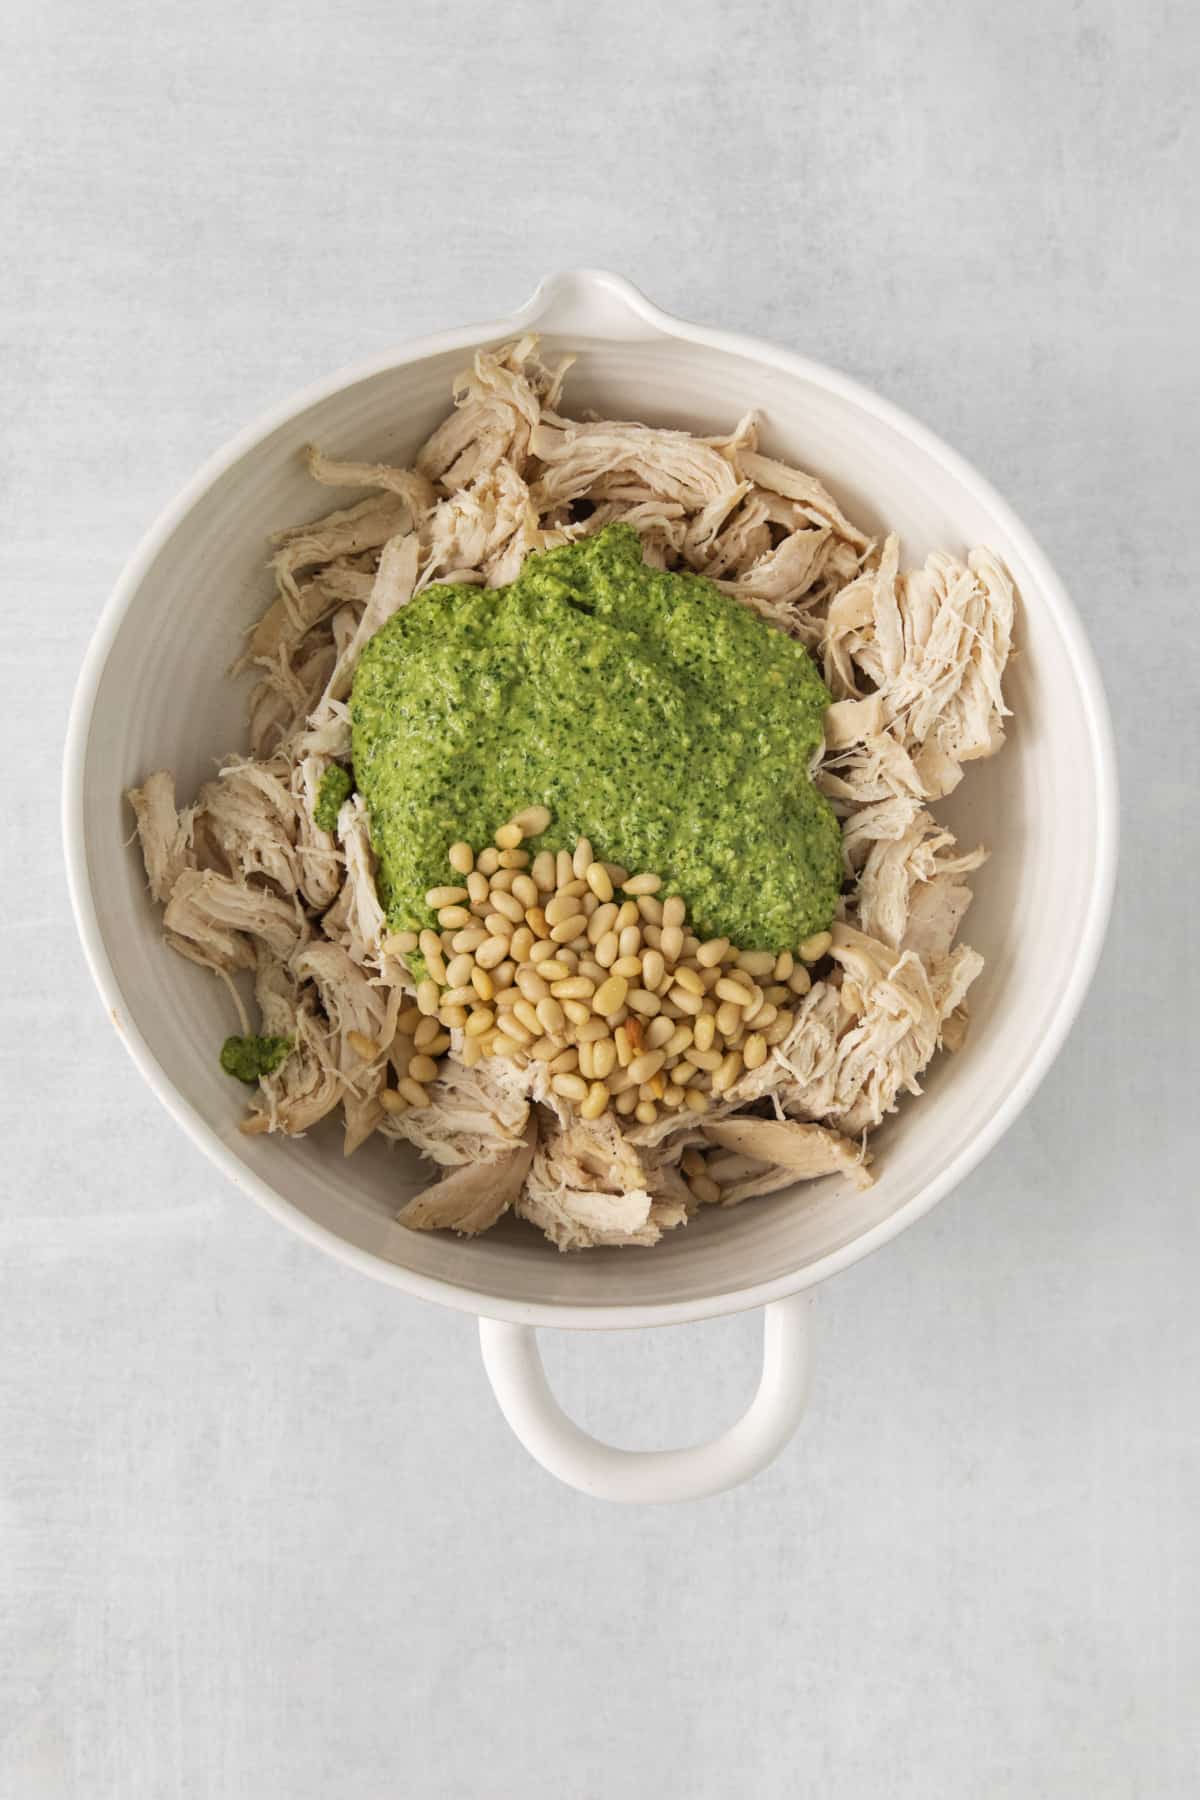 chicken, pesto, and pine nuts in a mixing bowl.